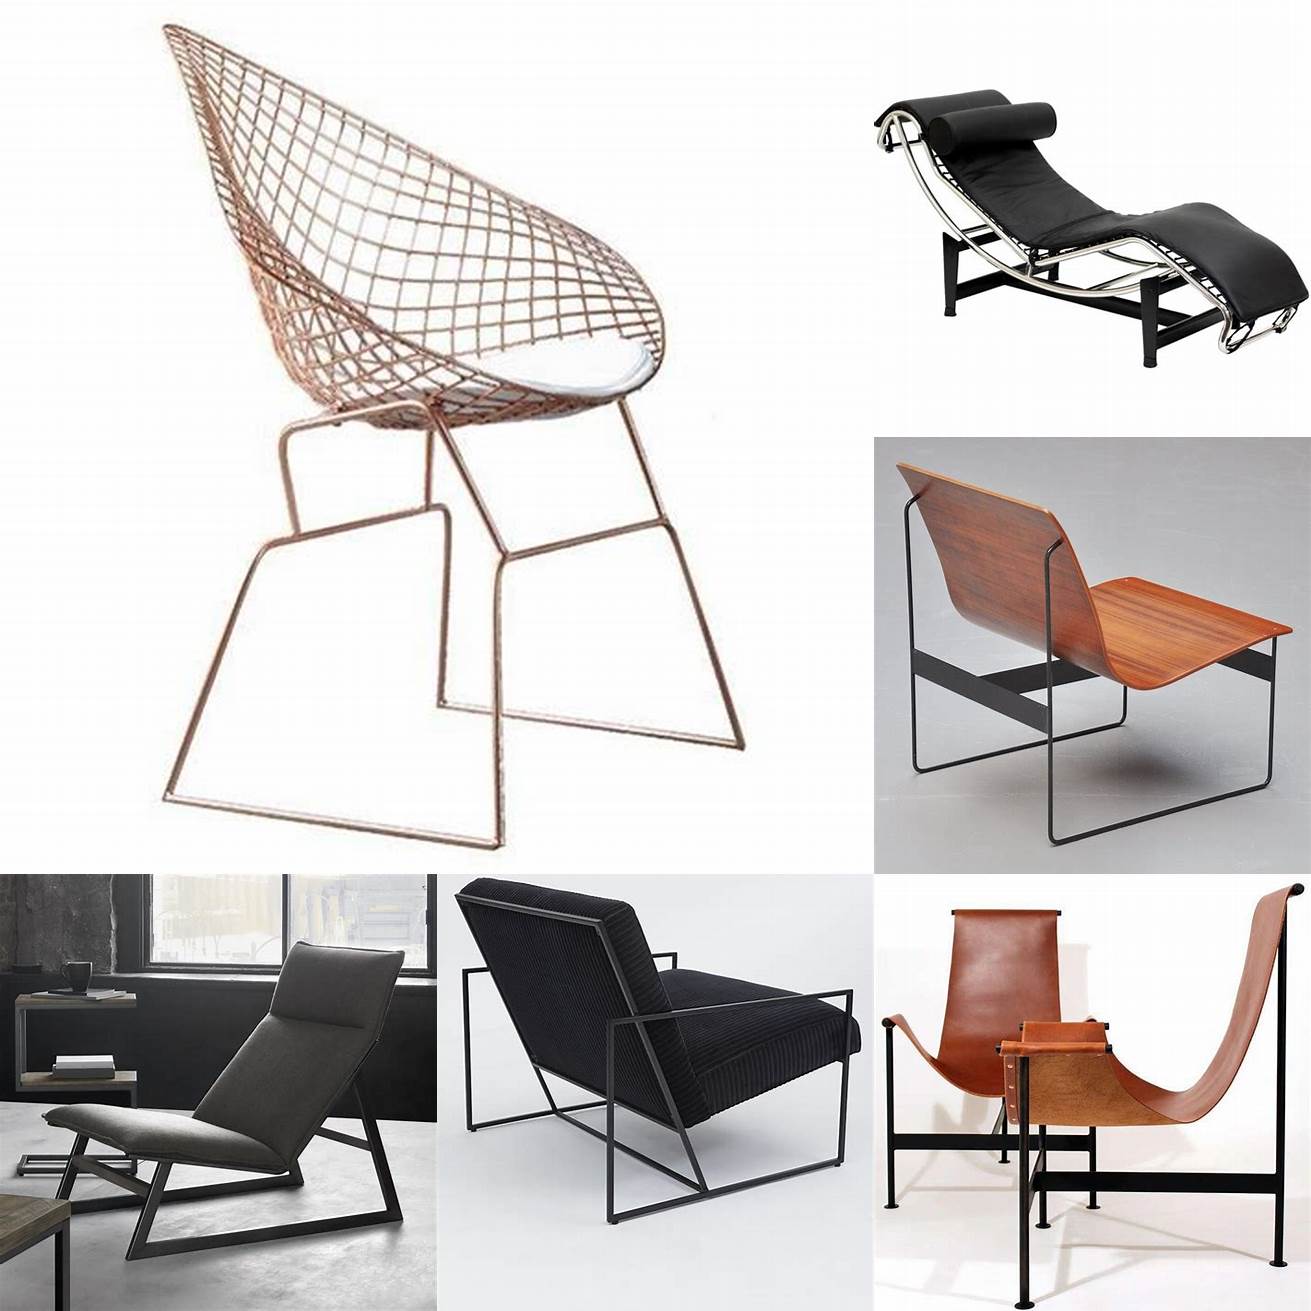 Metal lounge chairs with minimalist design